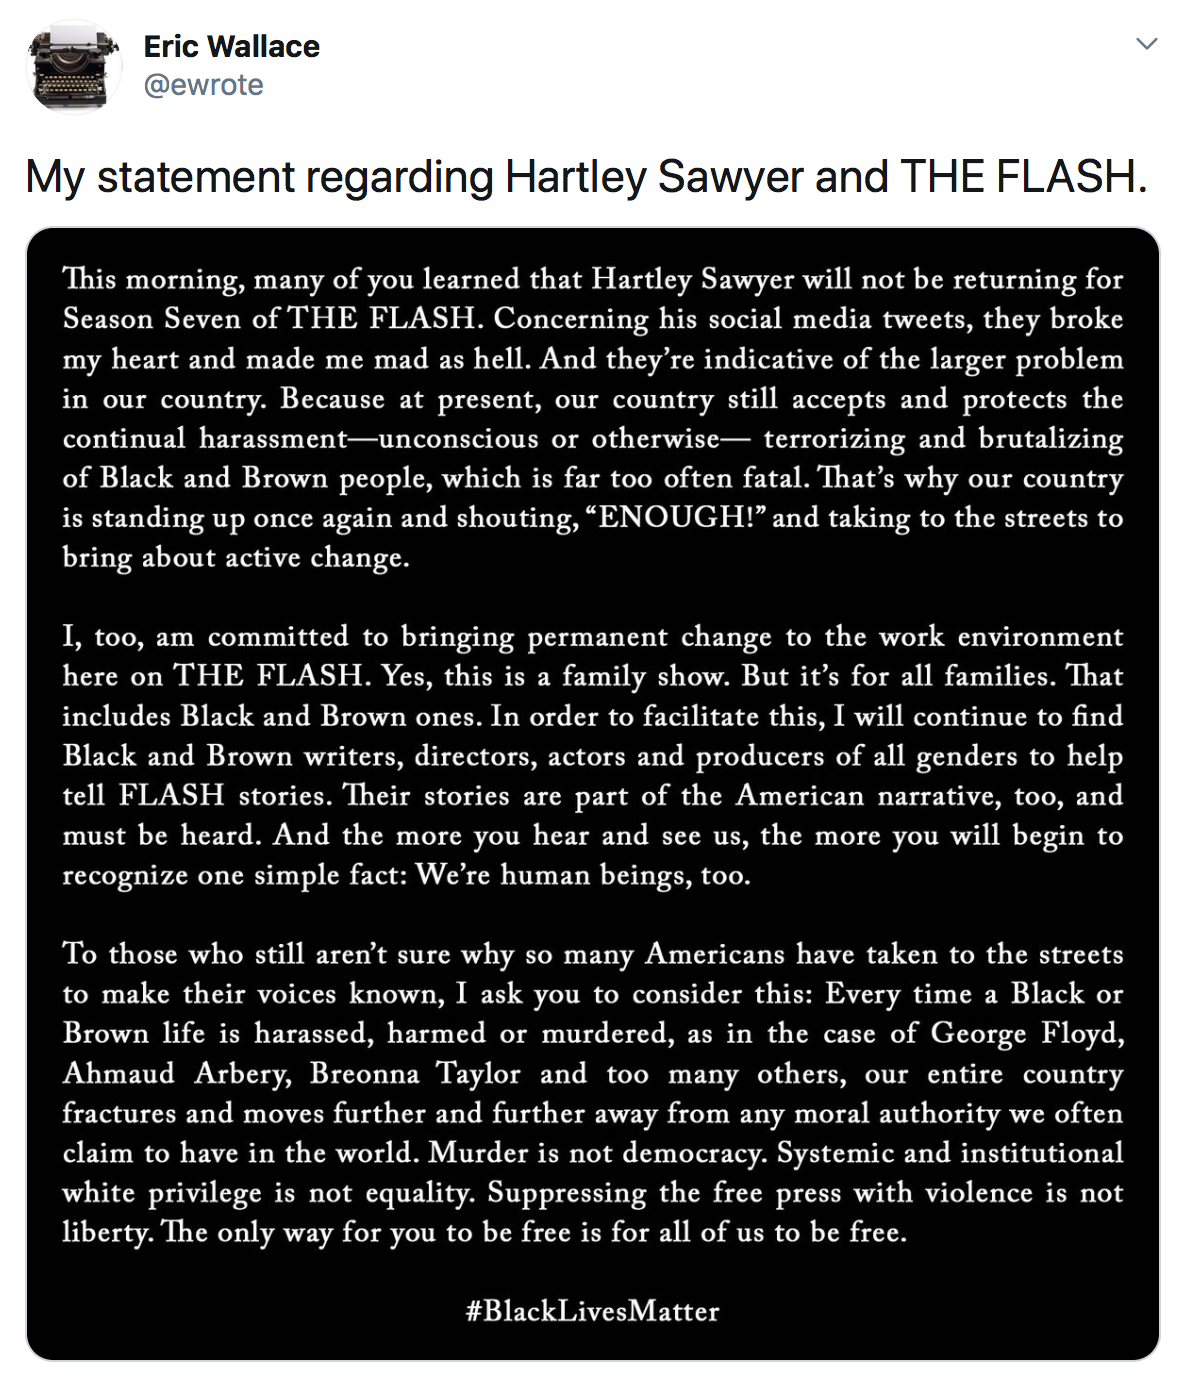 Eric Wallace Statement on The Flash and Hartley Sawyer